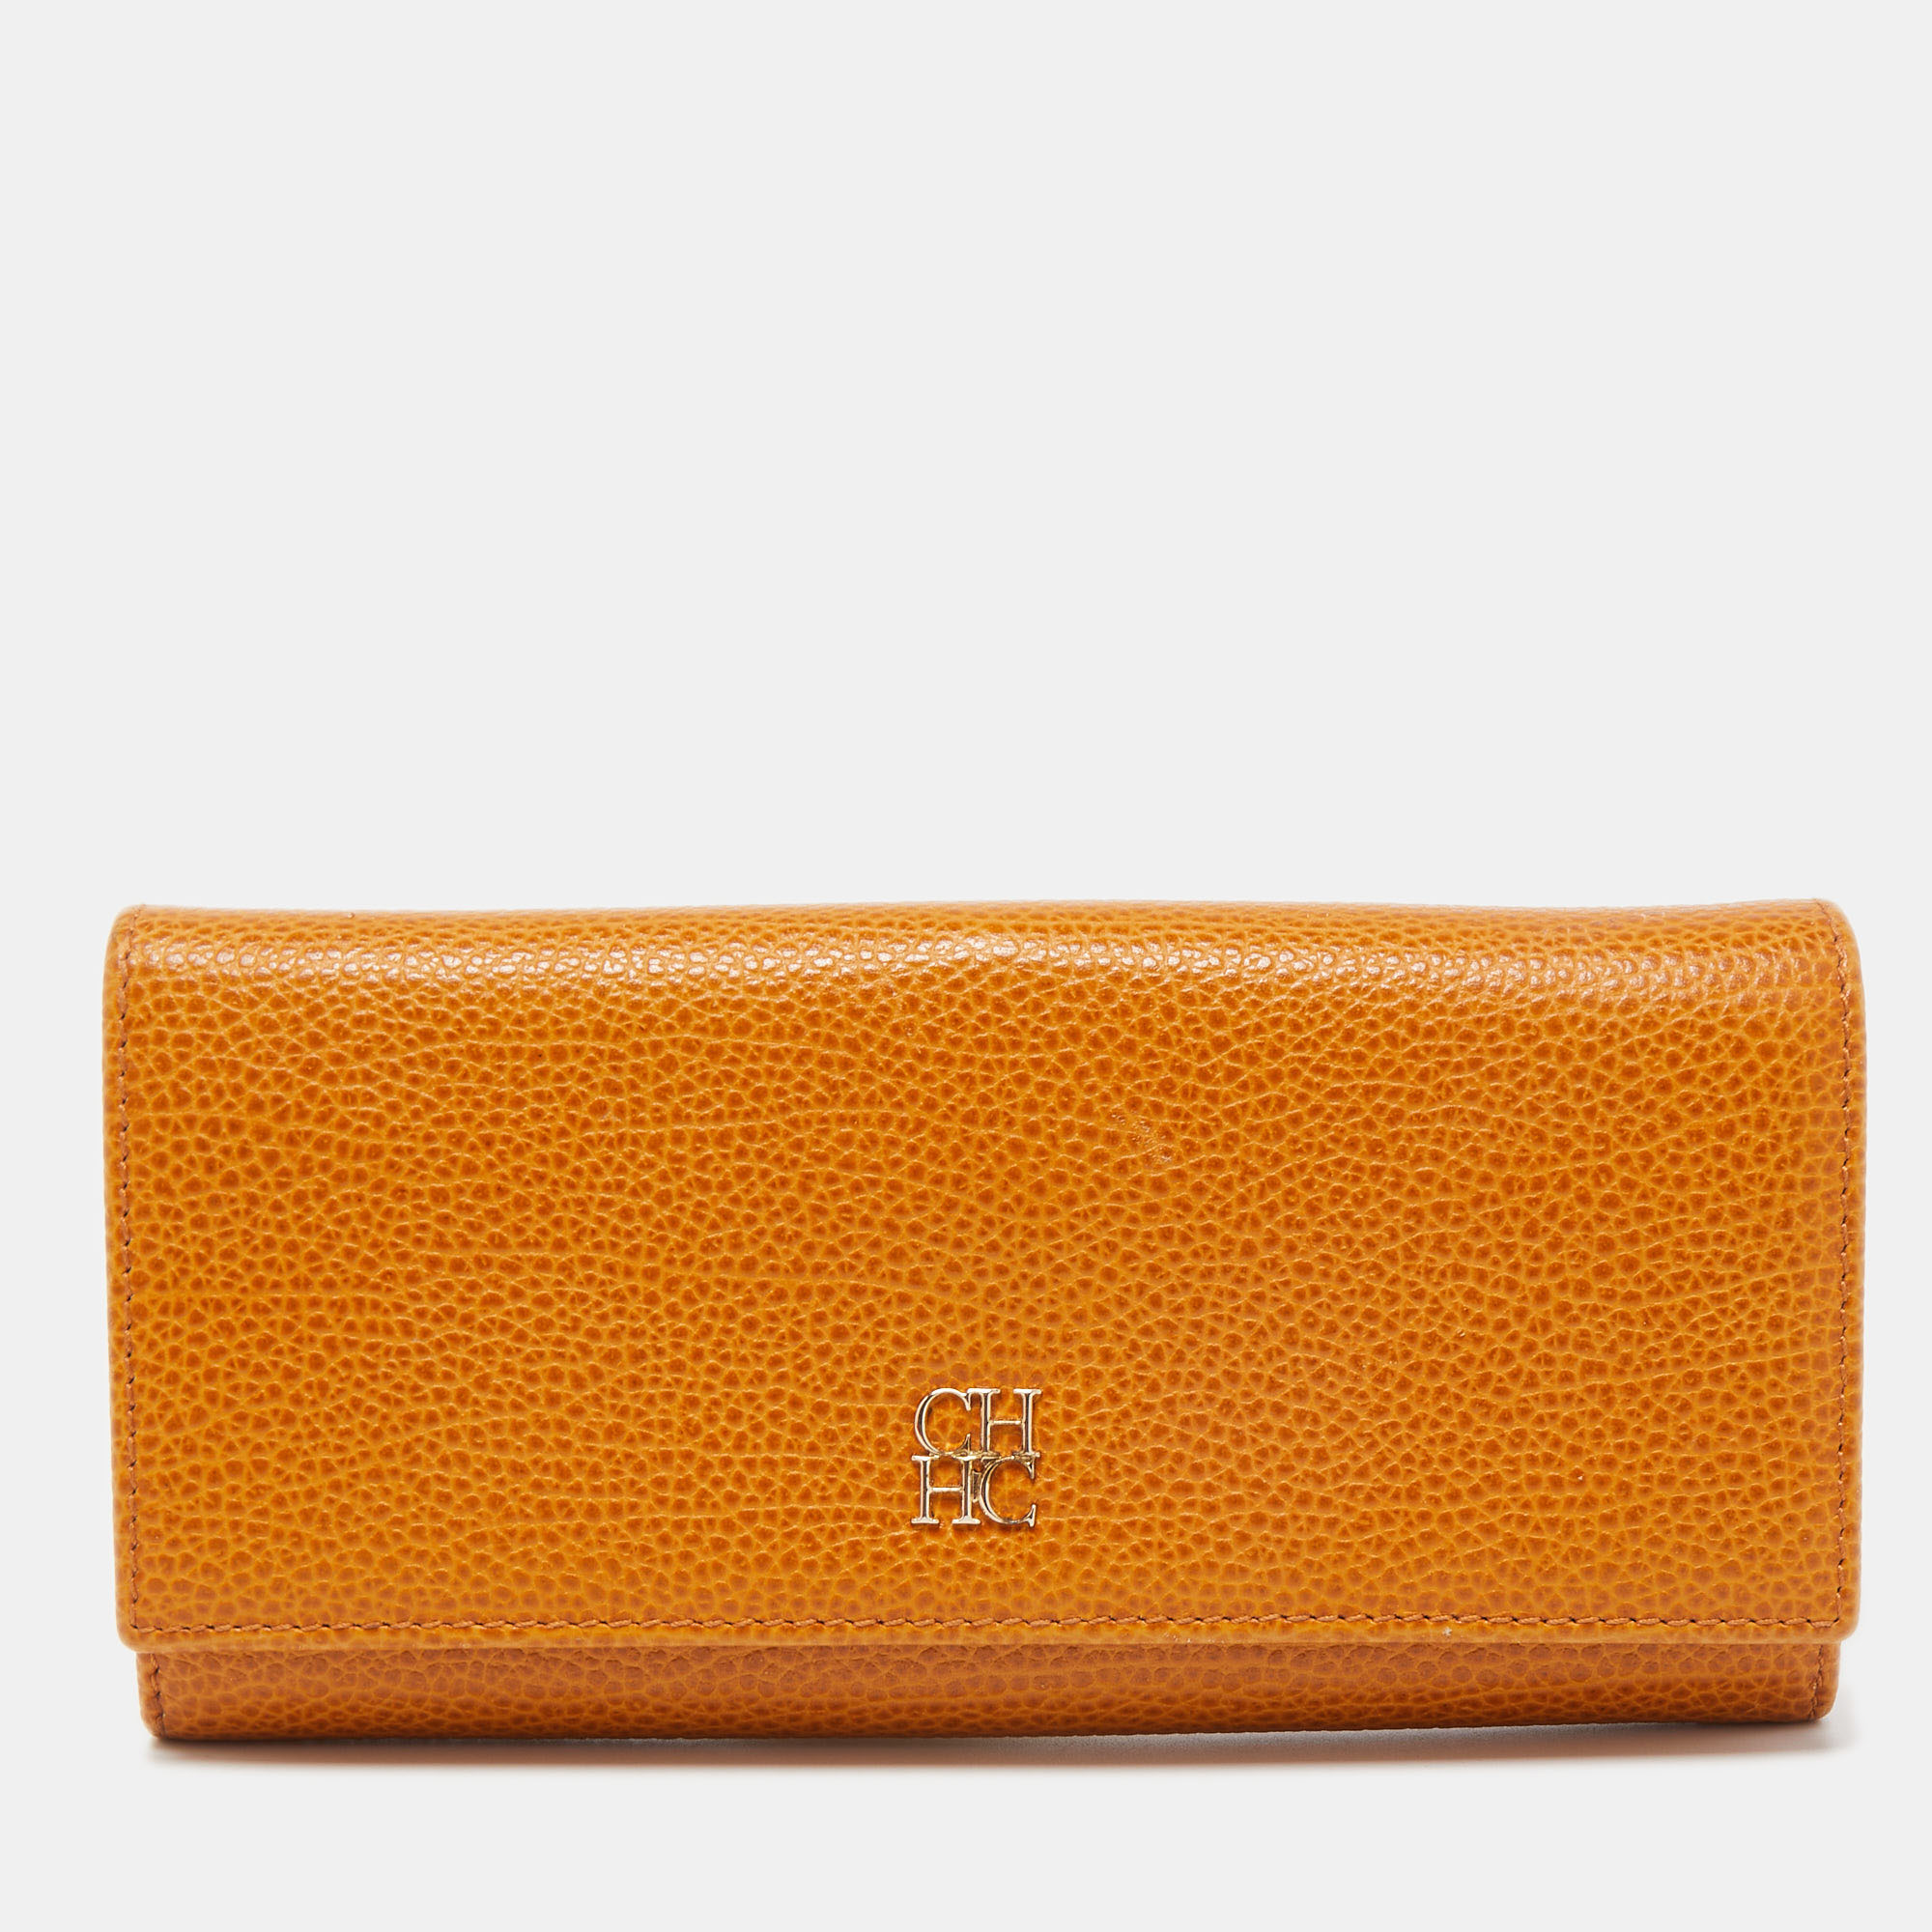 Pre-owned Ch Carolina Herrera Tan Leather Continental Wallet